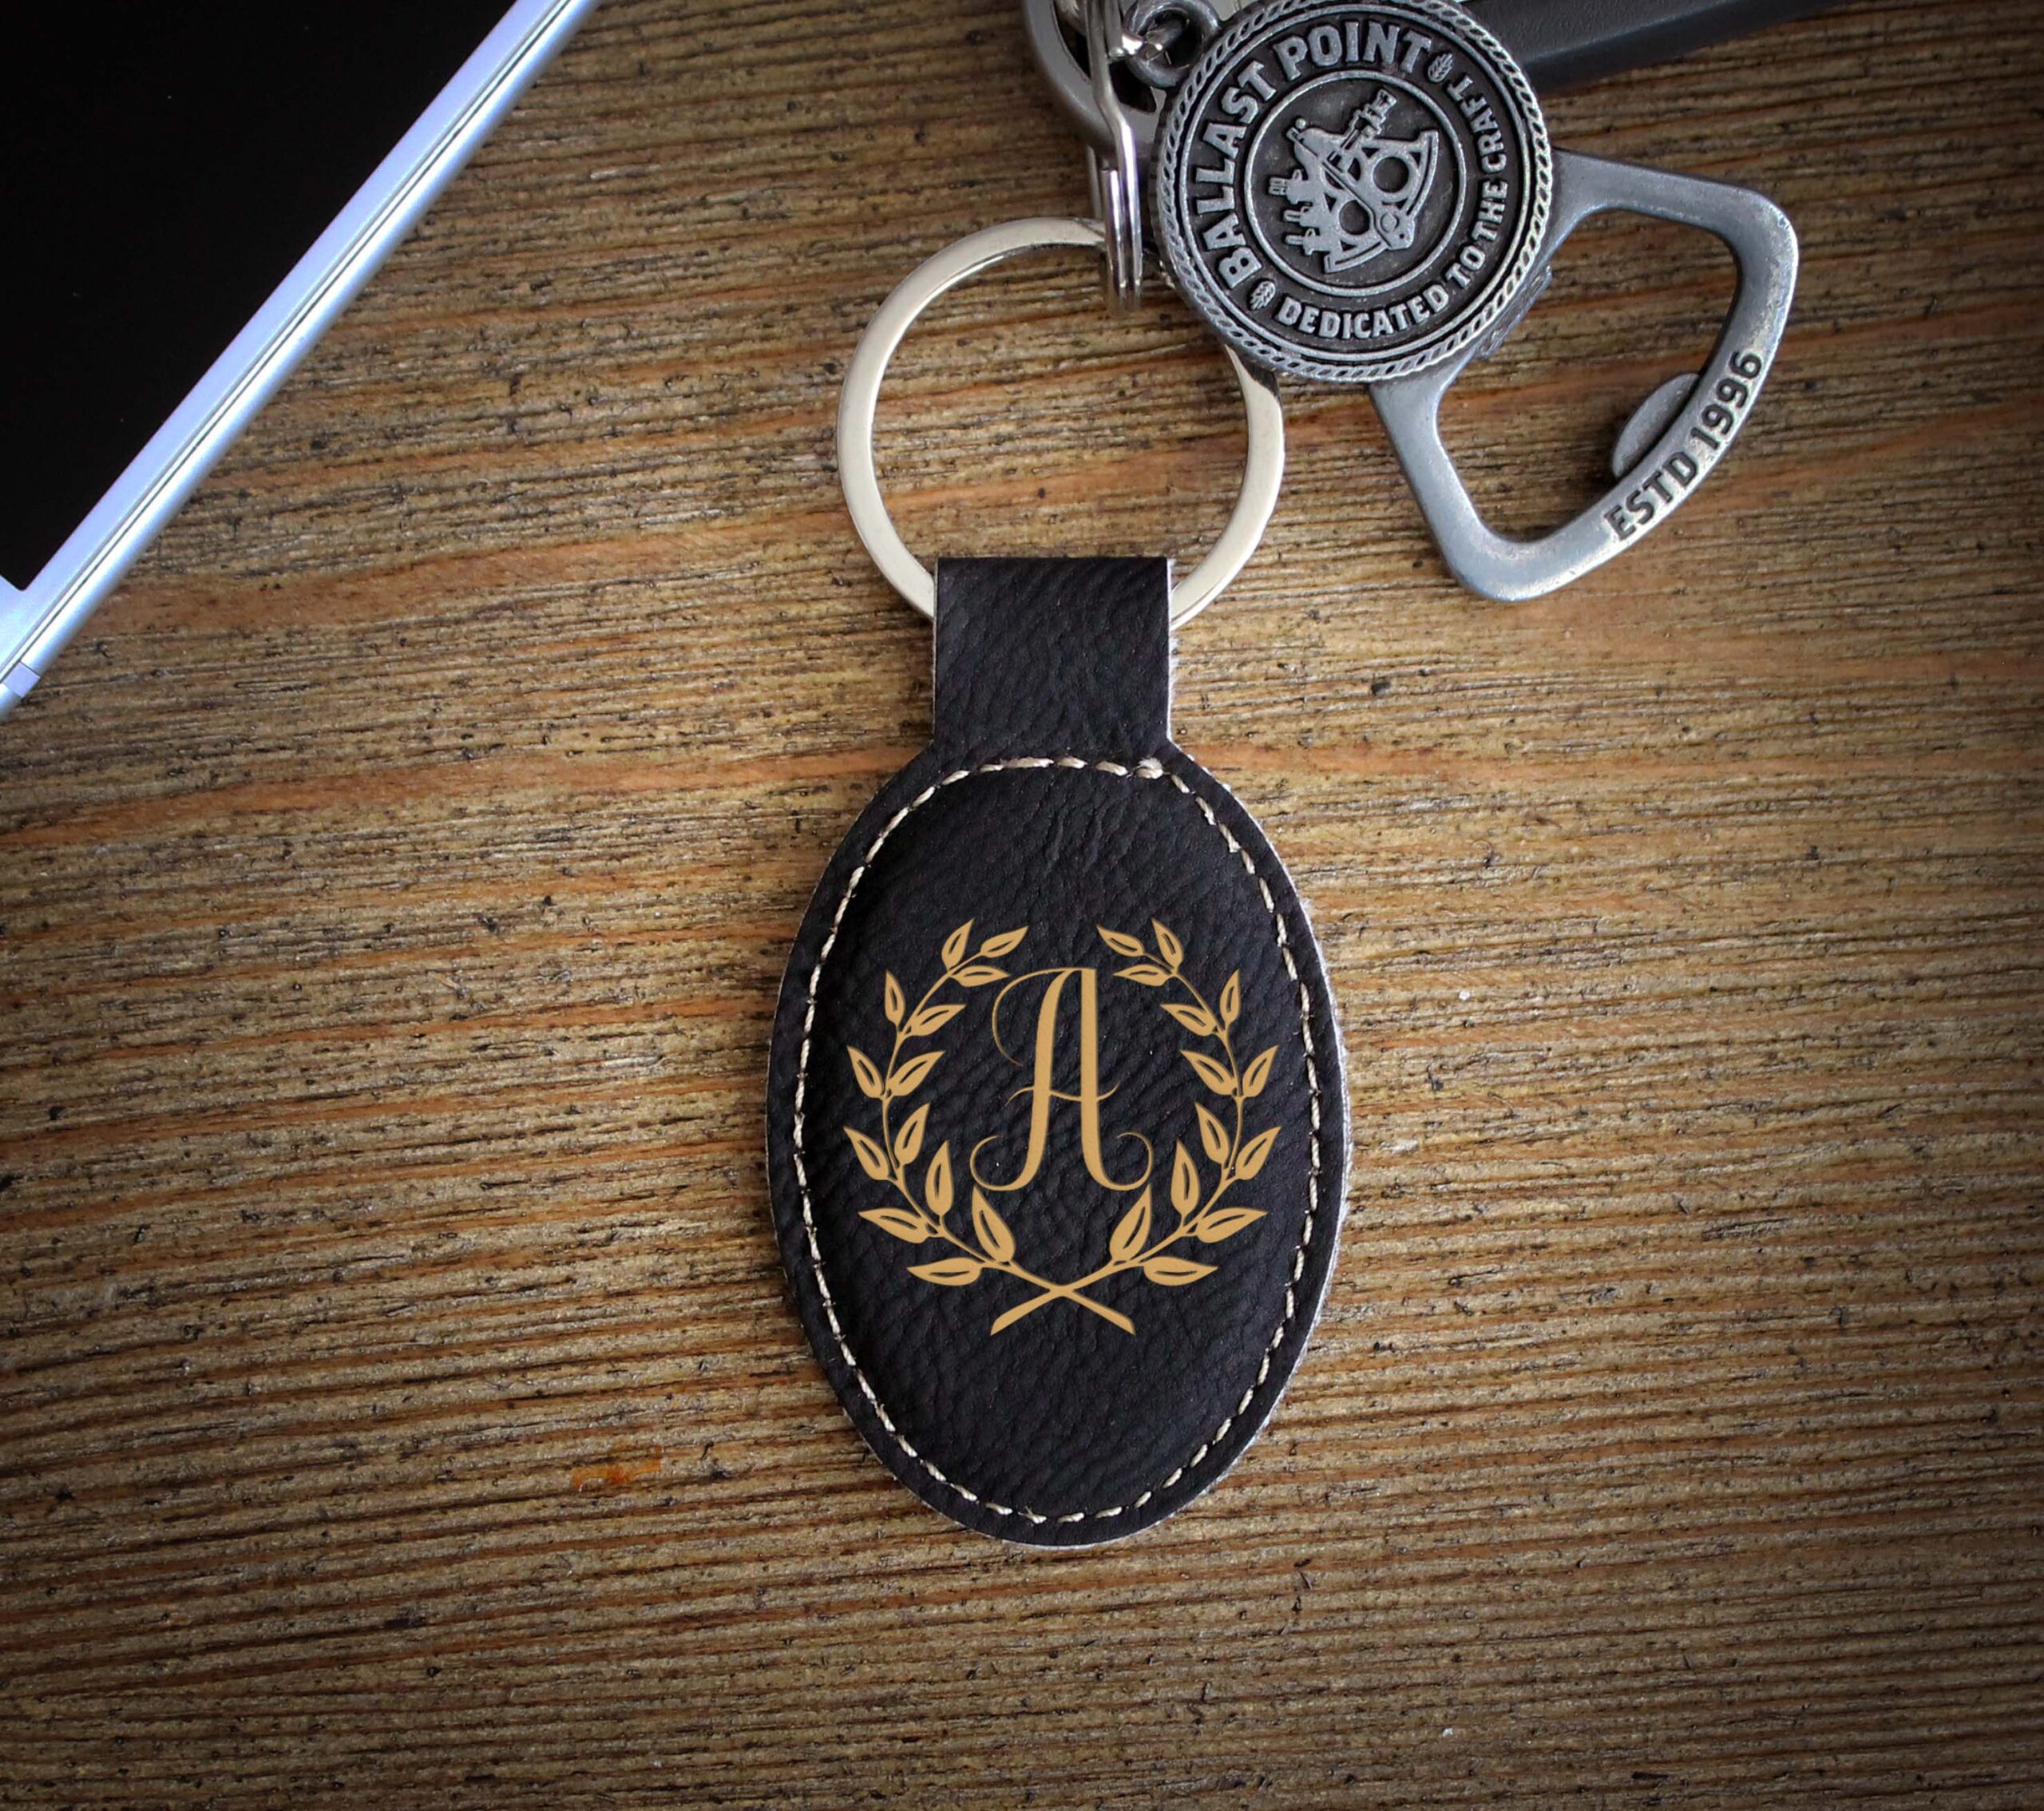 Personalized LOUISIANA License Plate Faux Leather Key Ring - Any Name -  Made to Order - Free Shipping